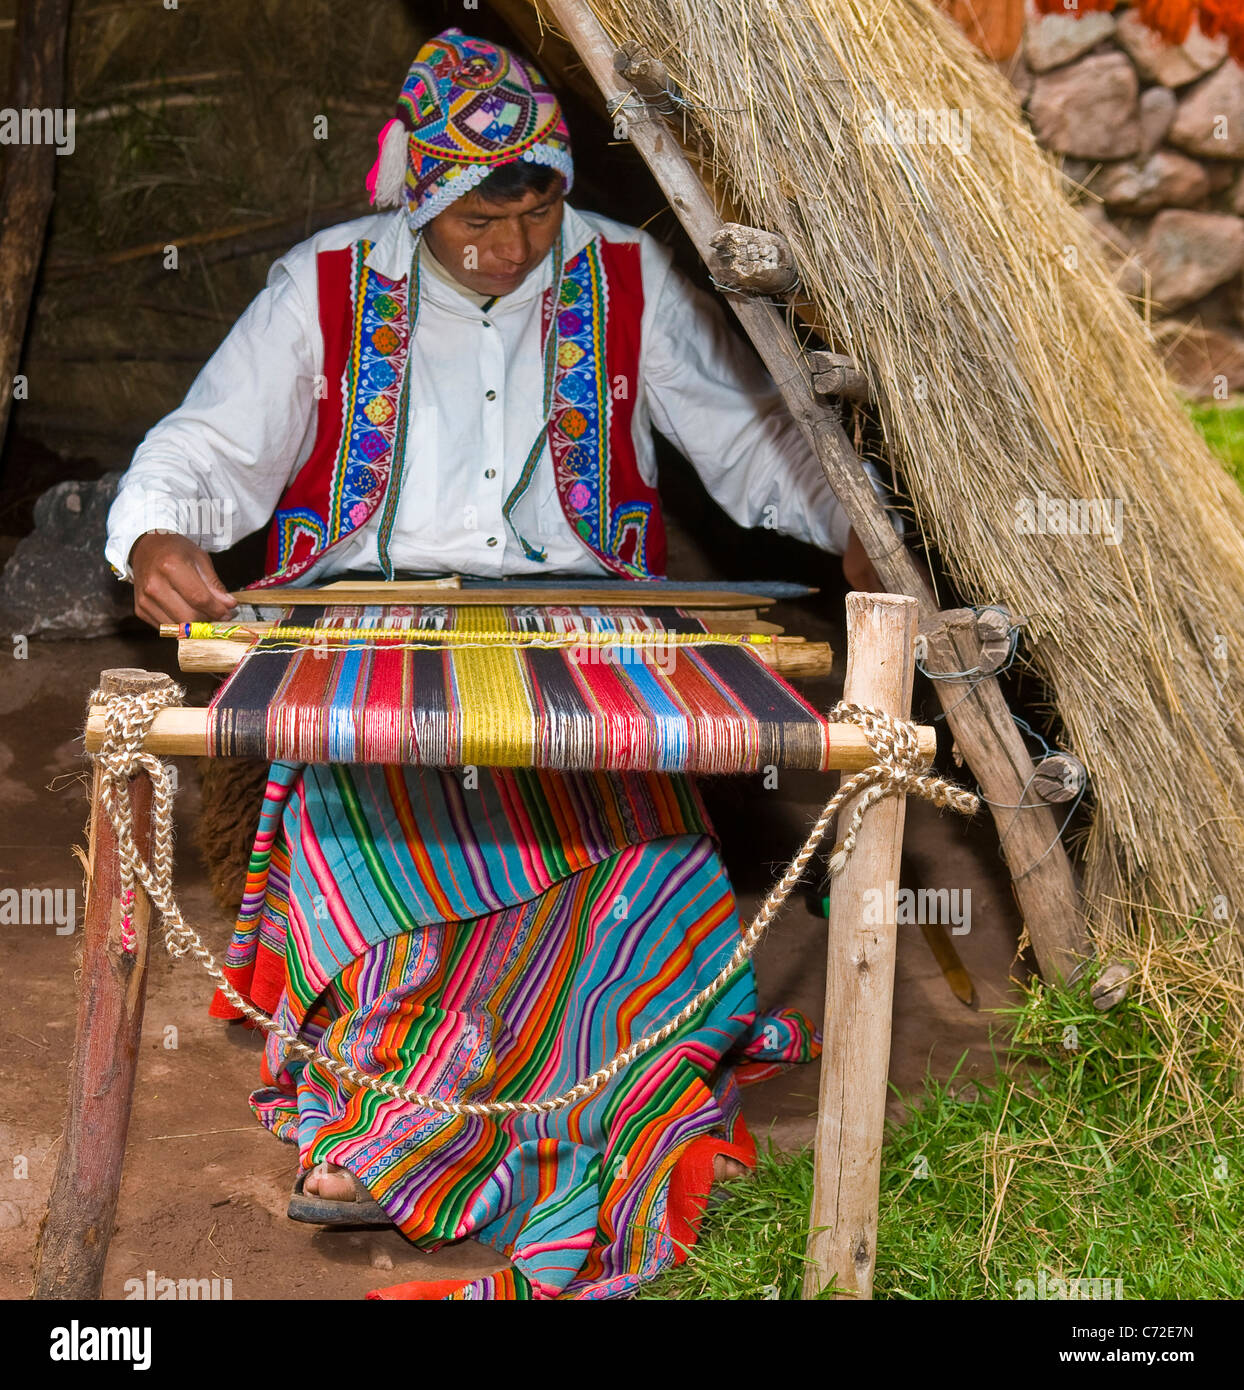 Quechua India man weaving with strap loom Stock Photo